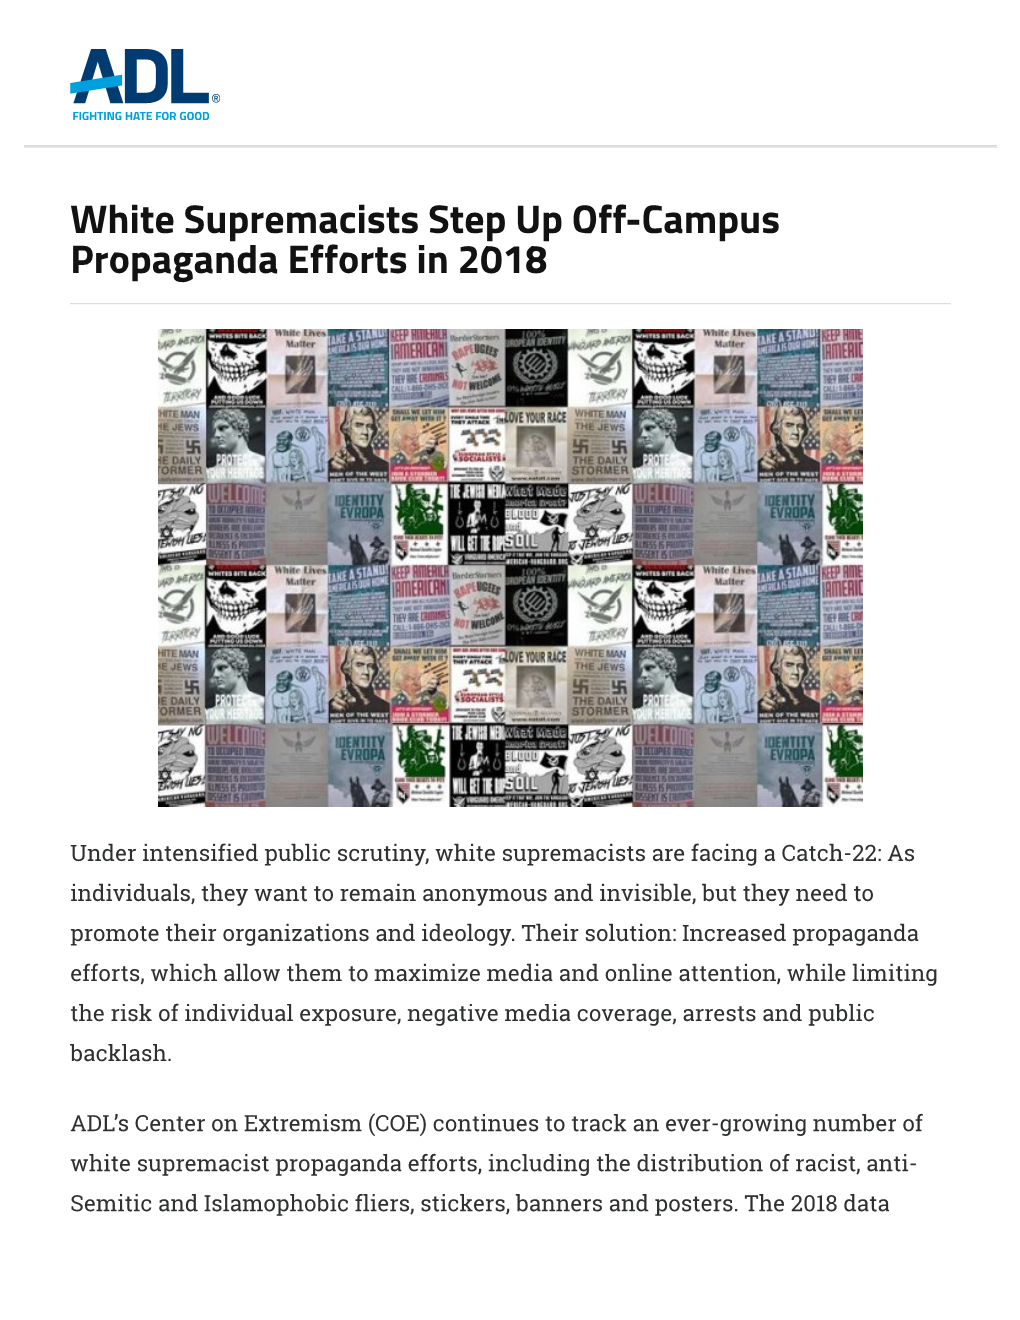 White Supremacists Step up Off-Campus Propaganda Efforts in 2018